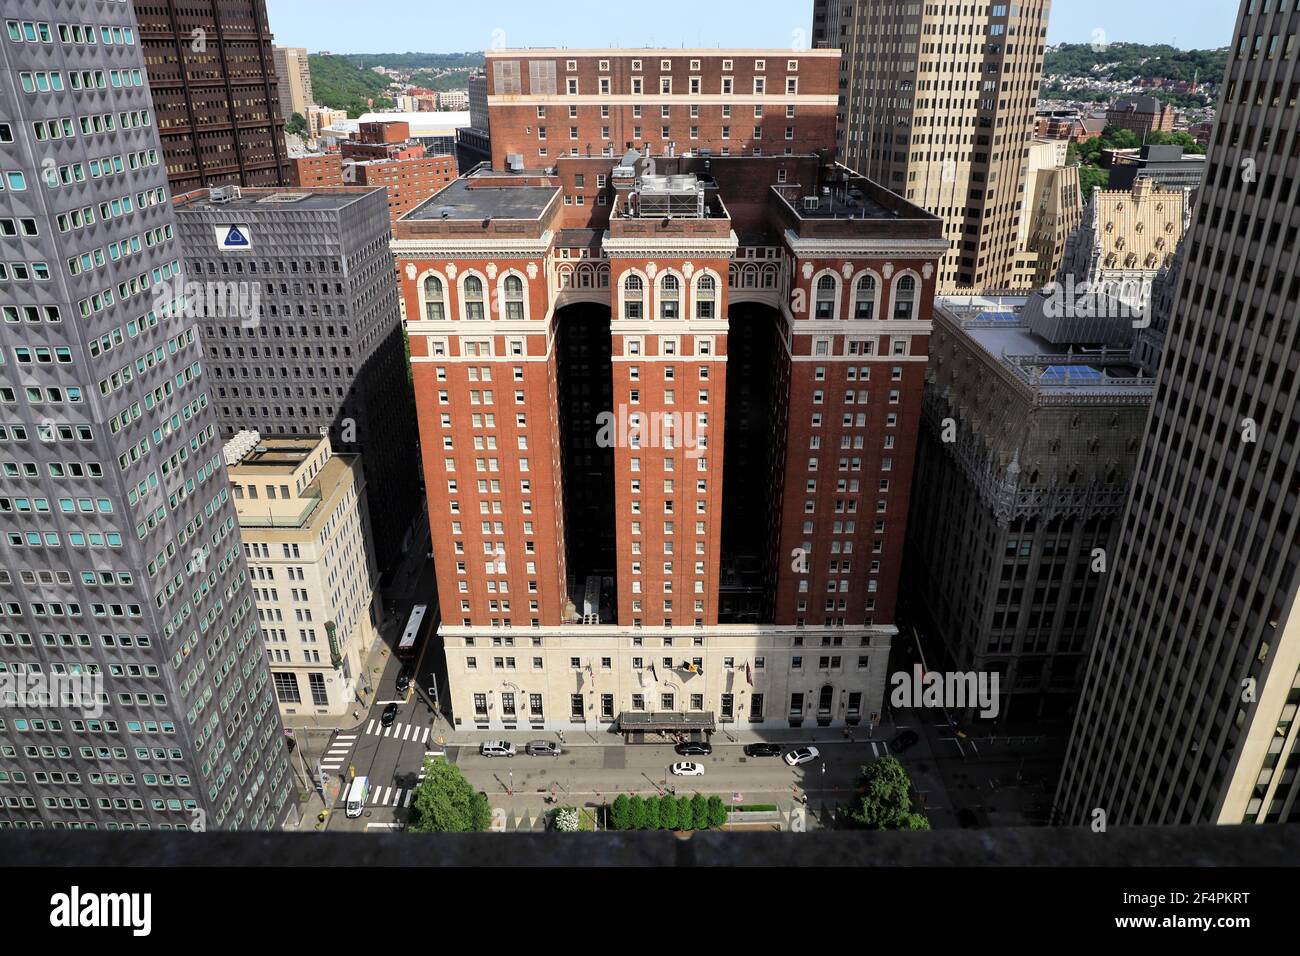 Exterior view of historic Omni William Penn Hotel in William Penn Place, Downtown Pittsburgh. Pennsylvania.USA Stock Photo